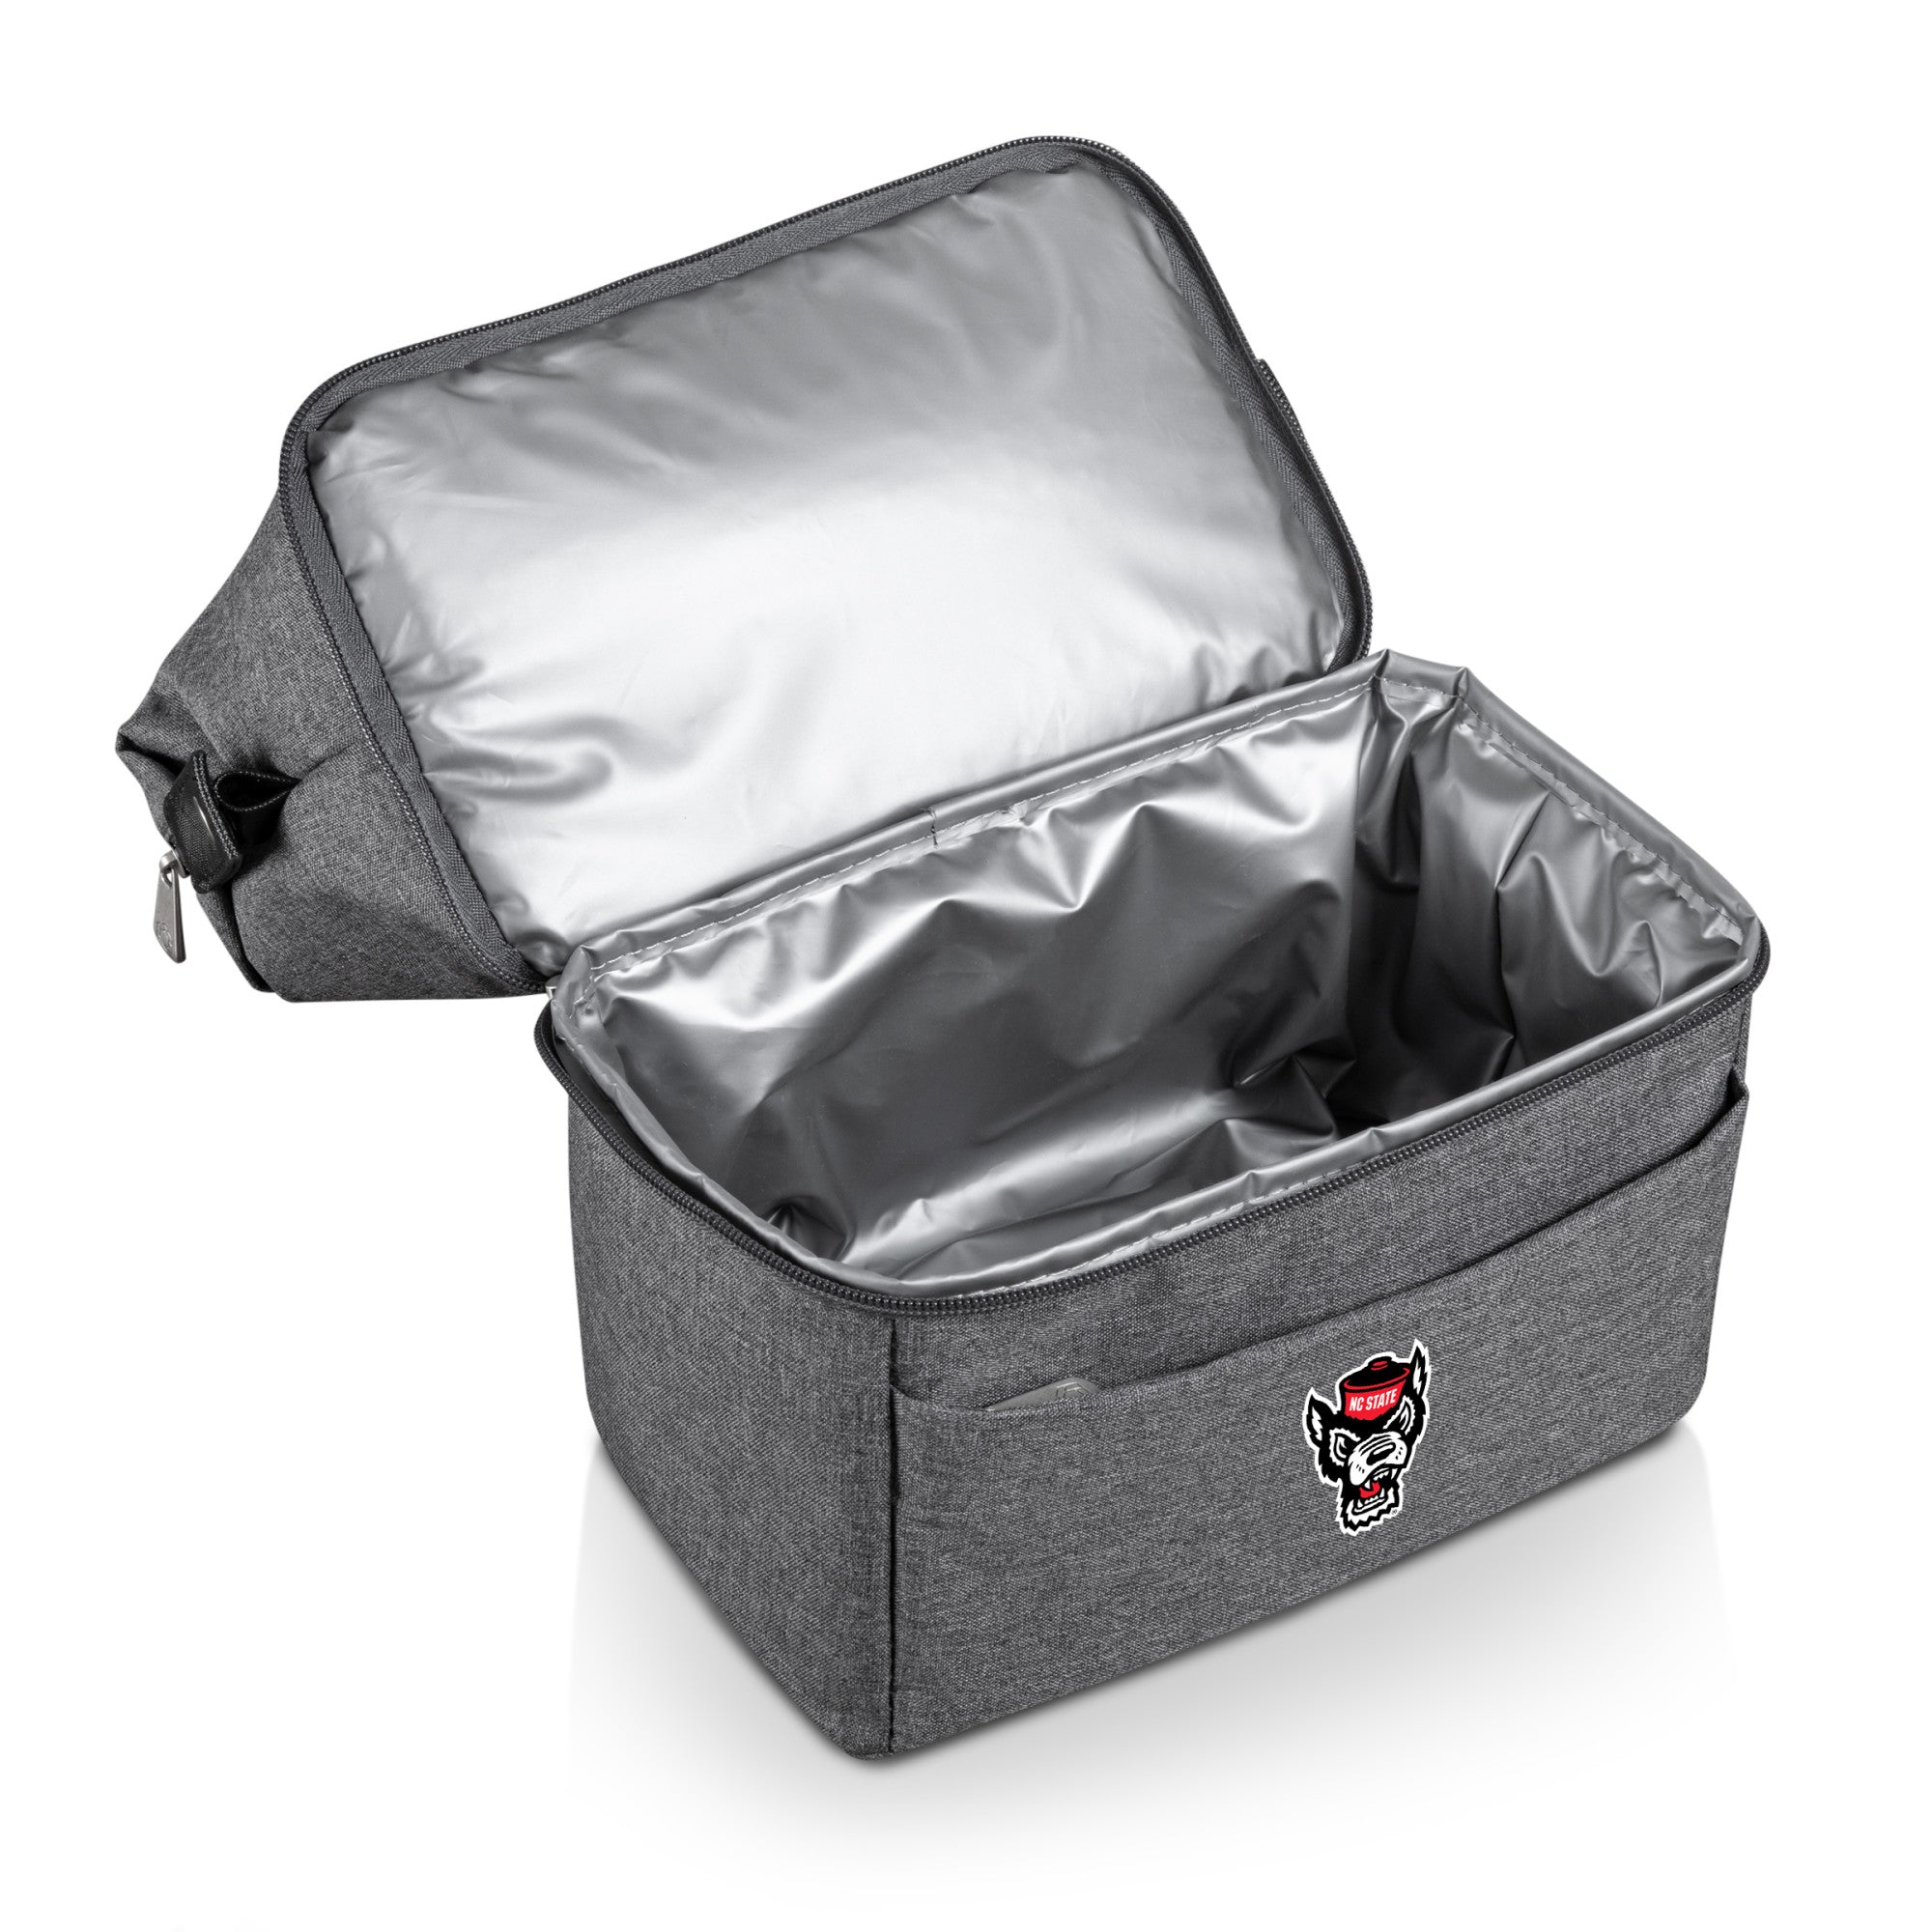 NC State Wolfpack - Urban Lunch Bag Cooler